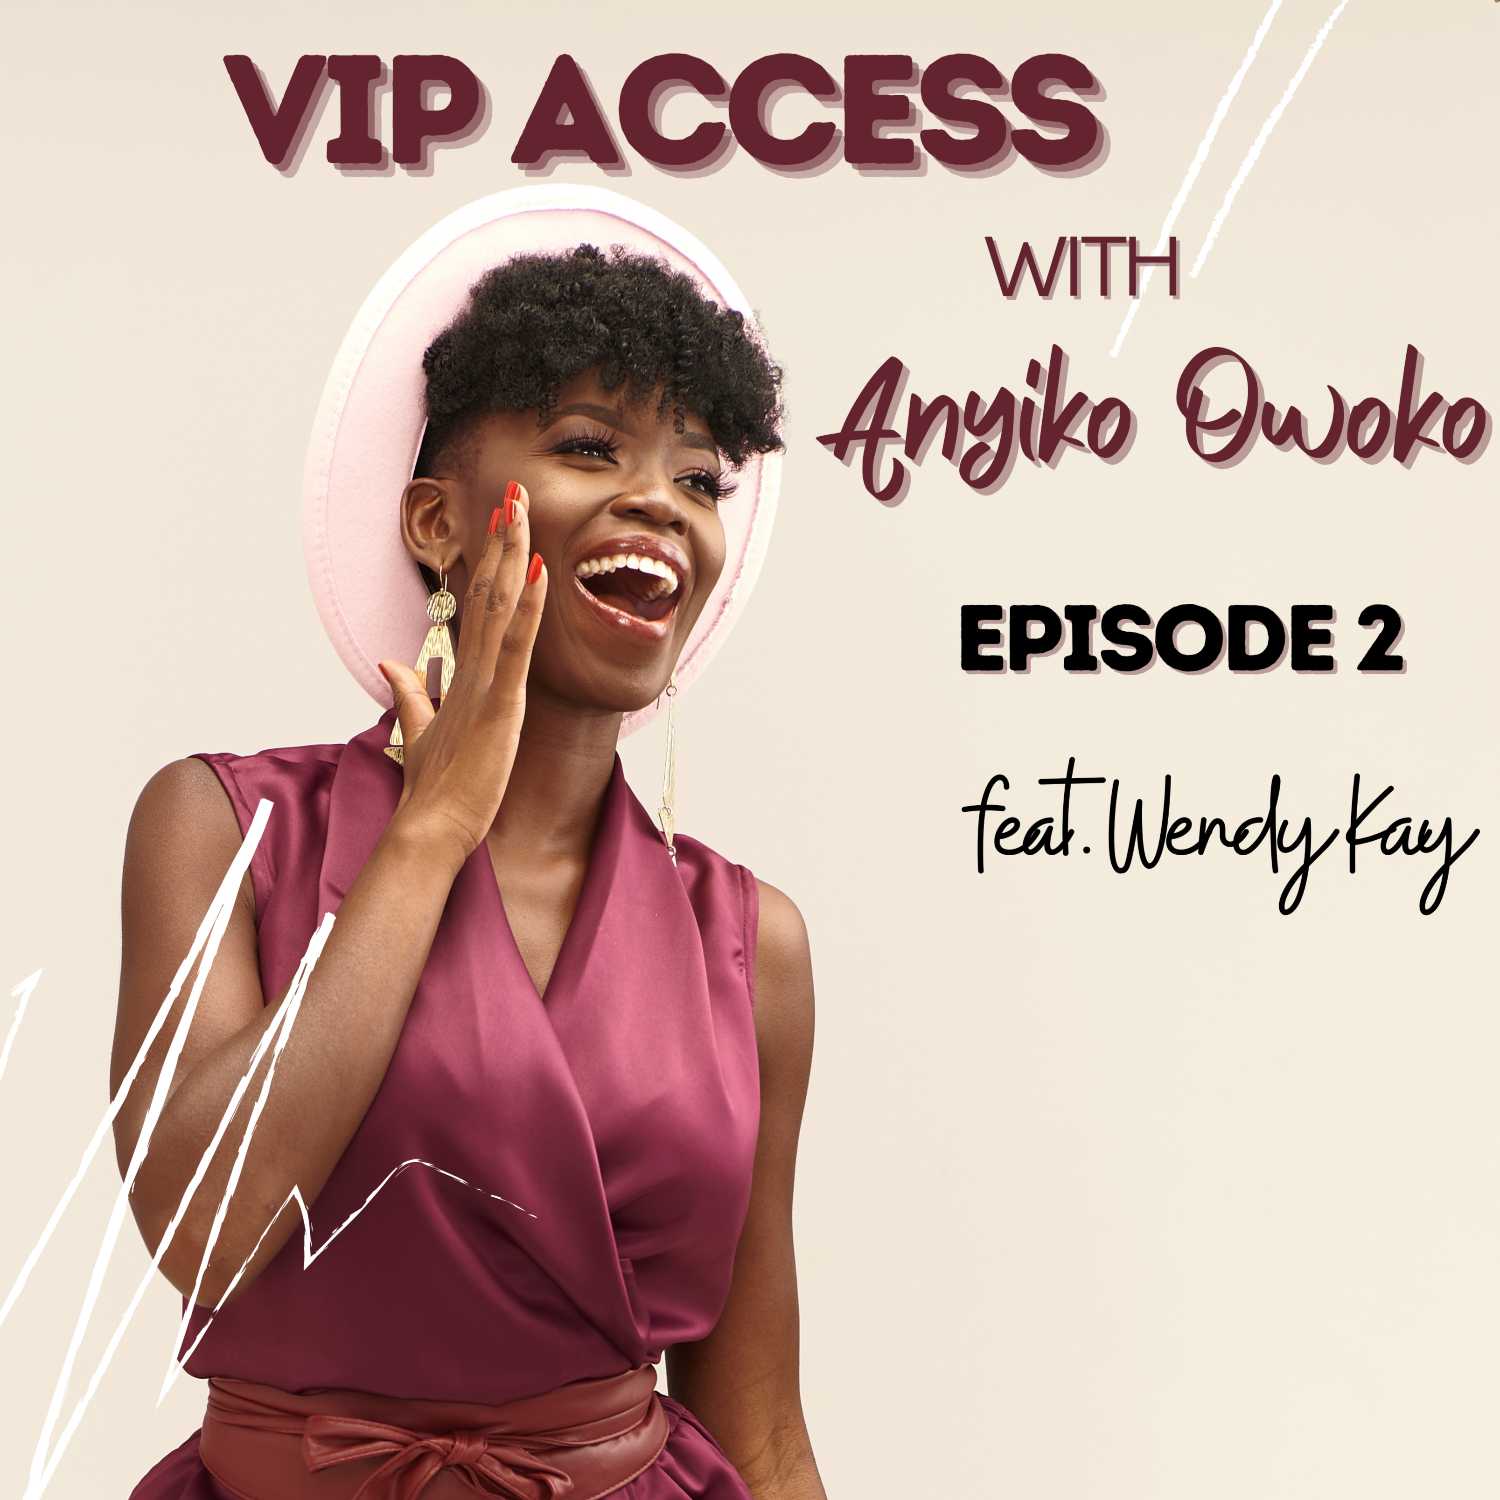 Ep 2: Wendy Kay on Charting Her Own Path